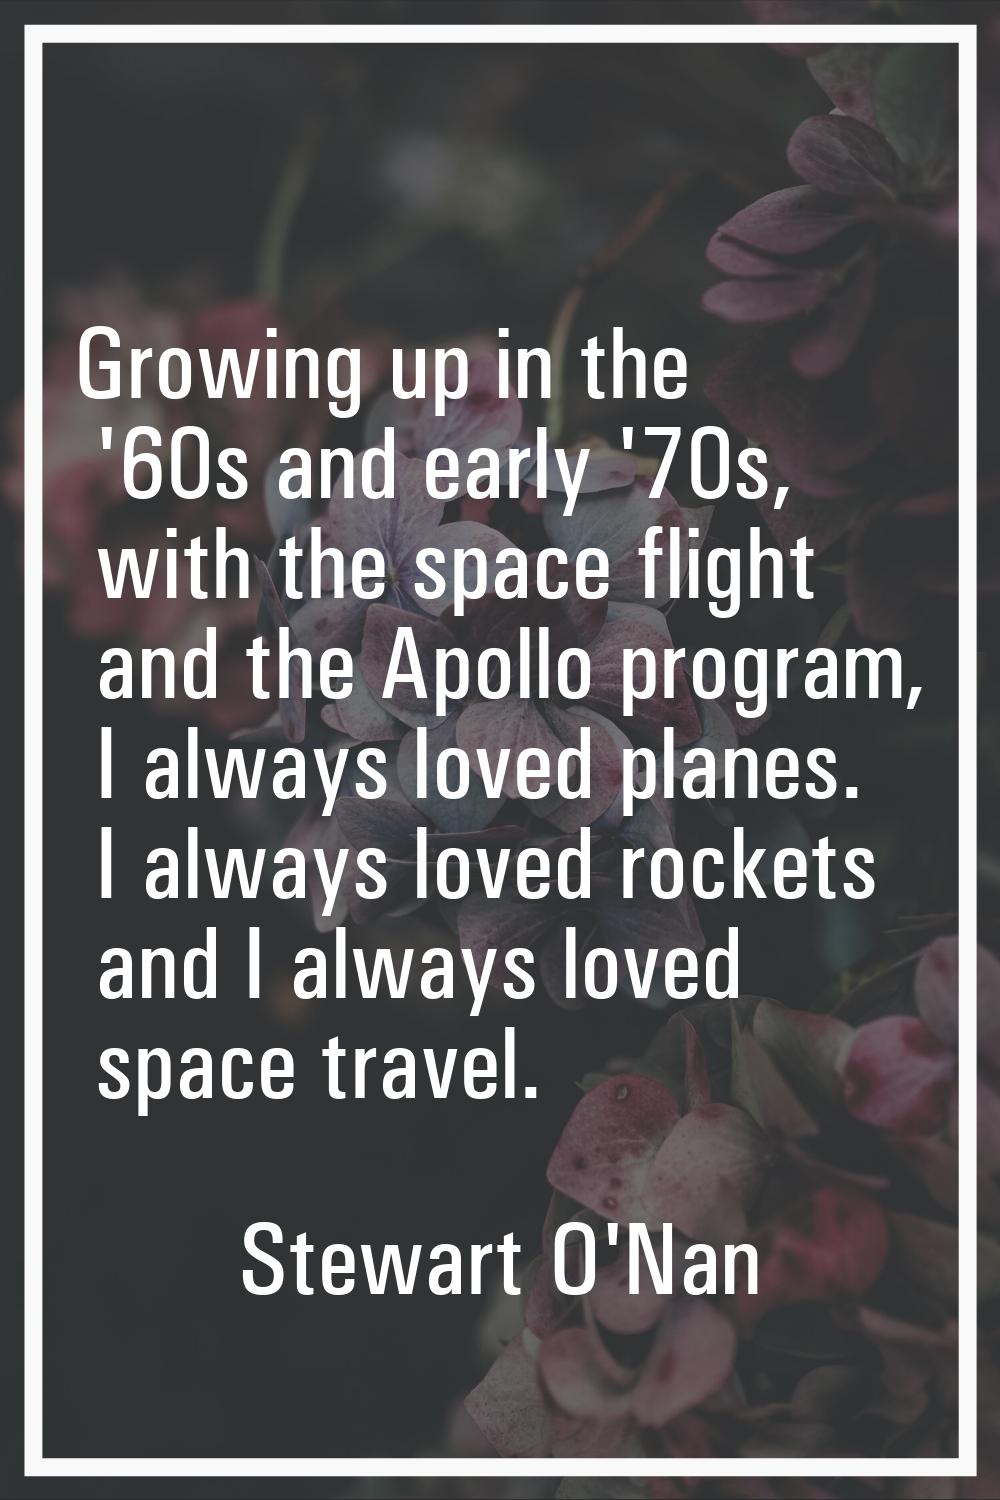 Growing up in the '60s and early '70s, with the space flight and the Apollo program, I always loved